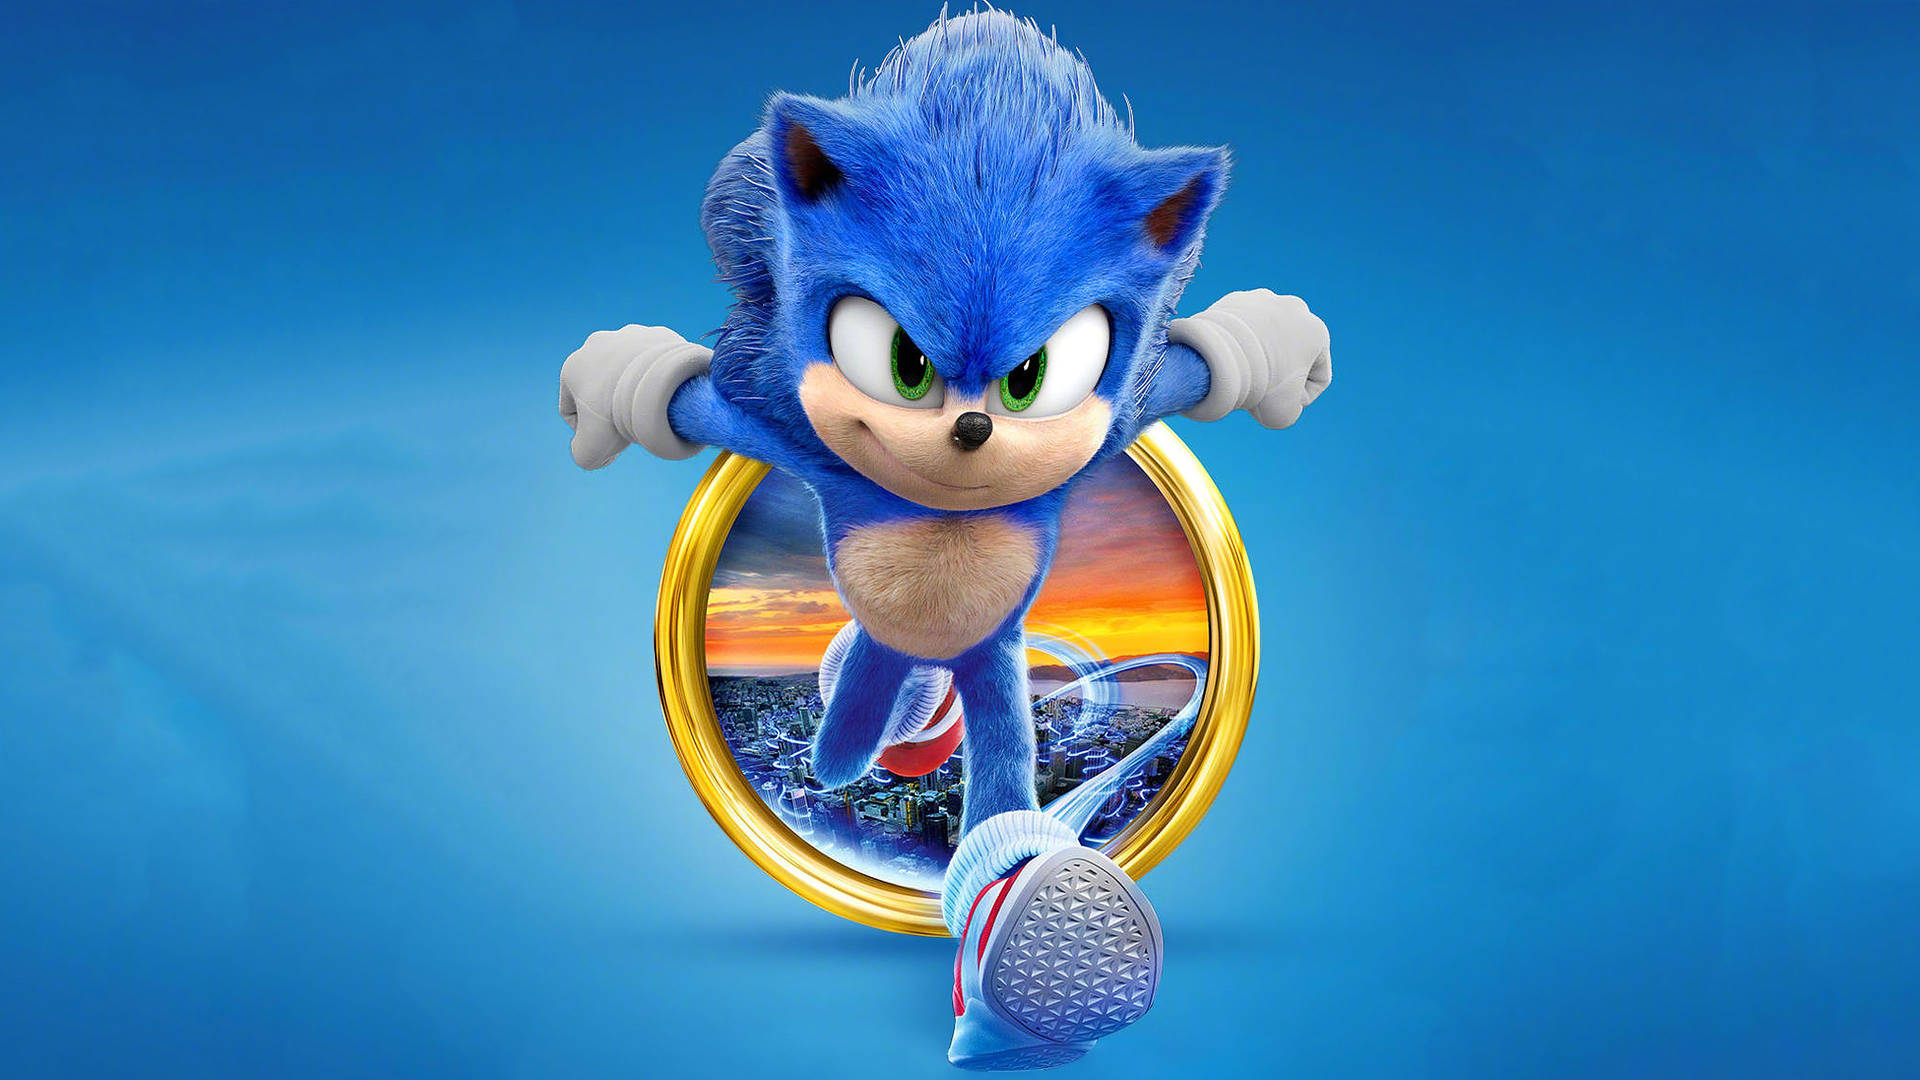 Sonic The Hedgehog's Dash For A Golden Ring Background